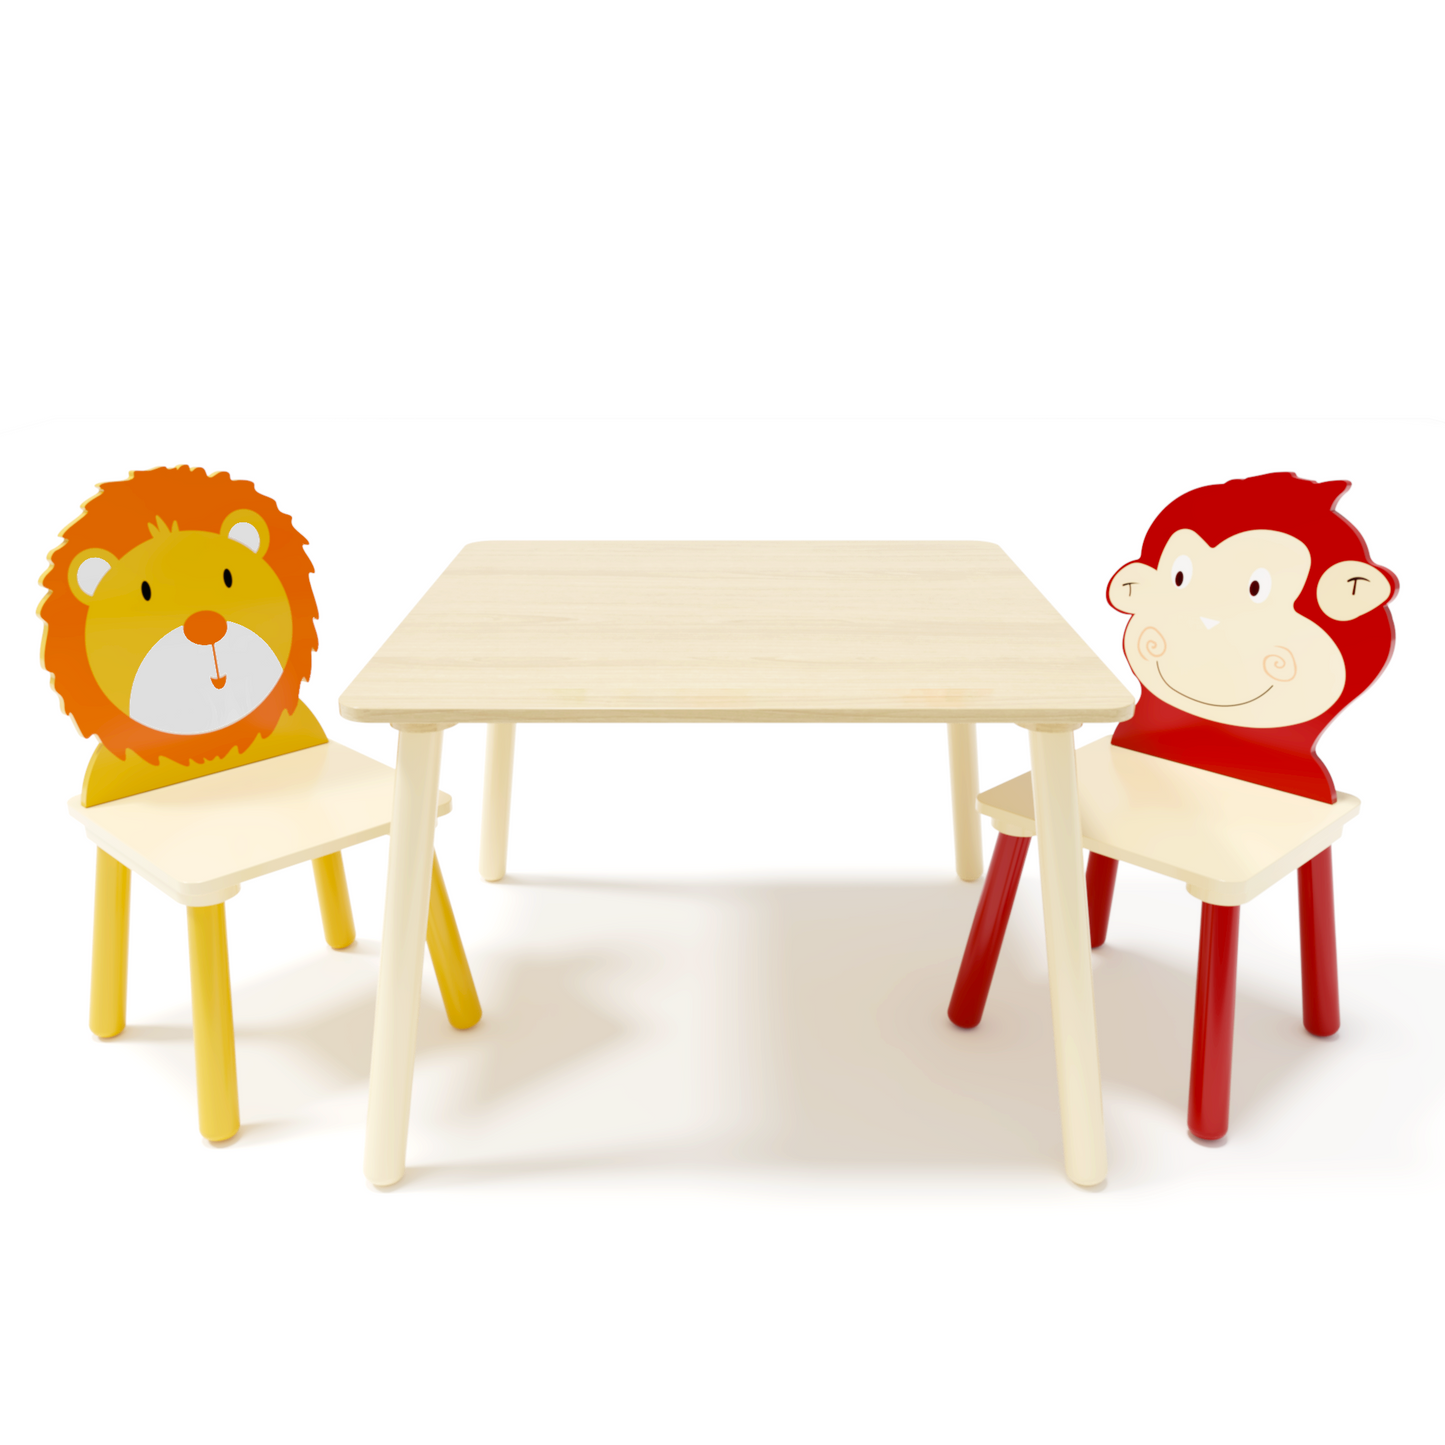 Smuxee Kids Table and Chair Set for Boys & Girls, Children Furniture